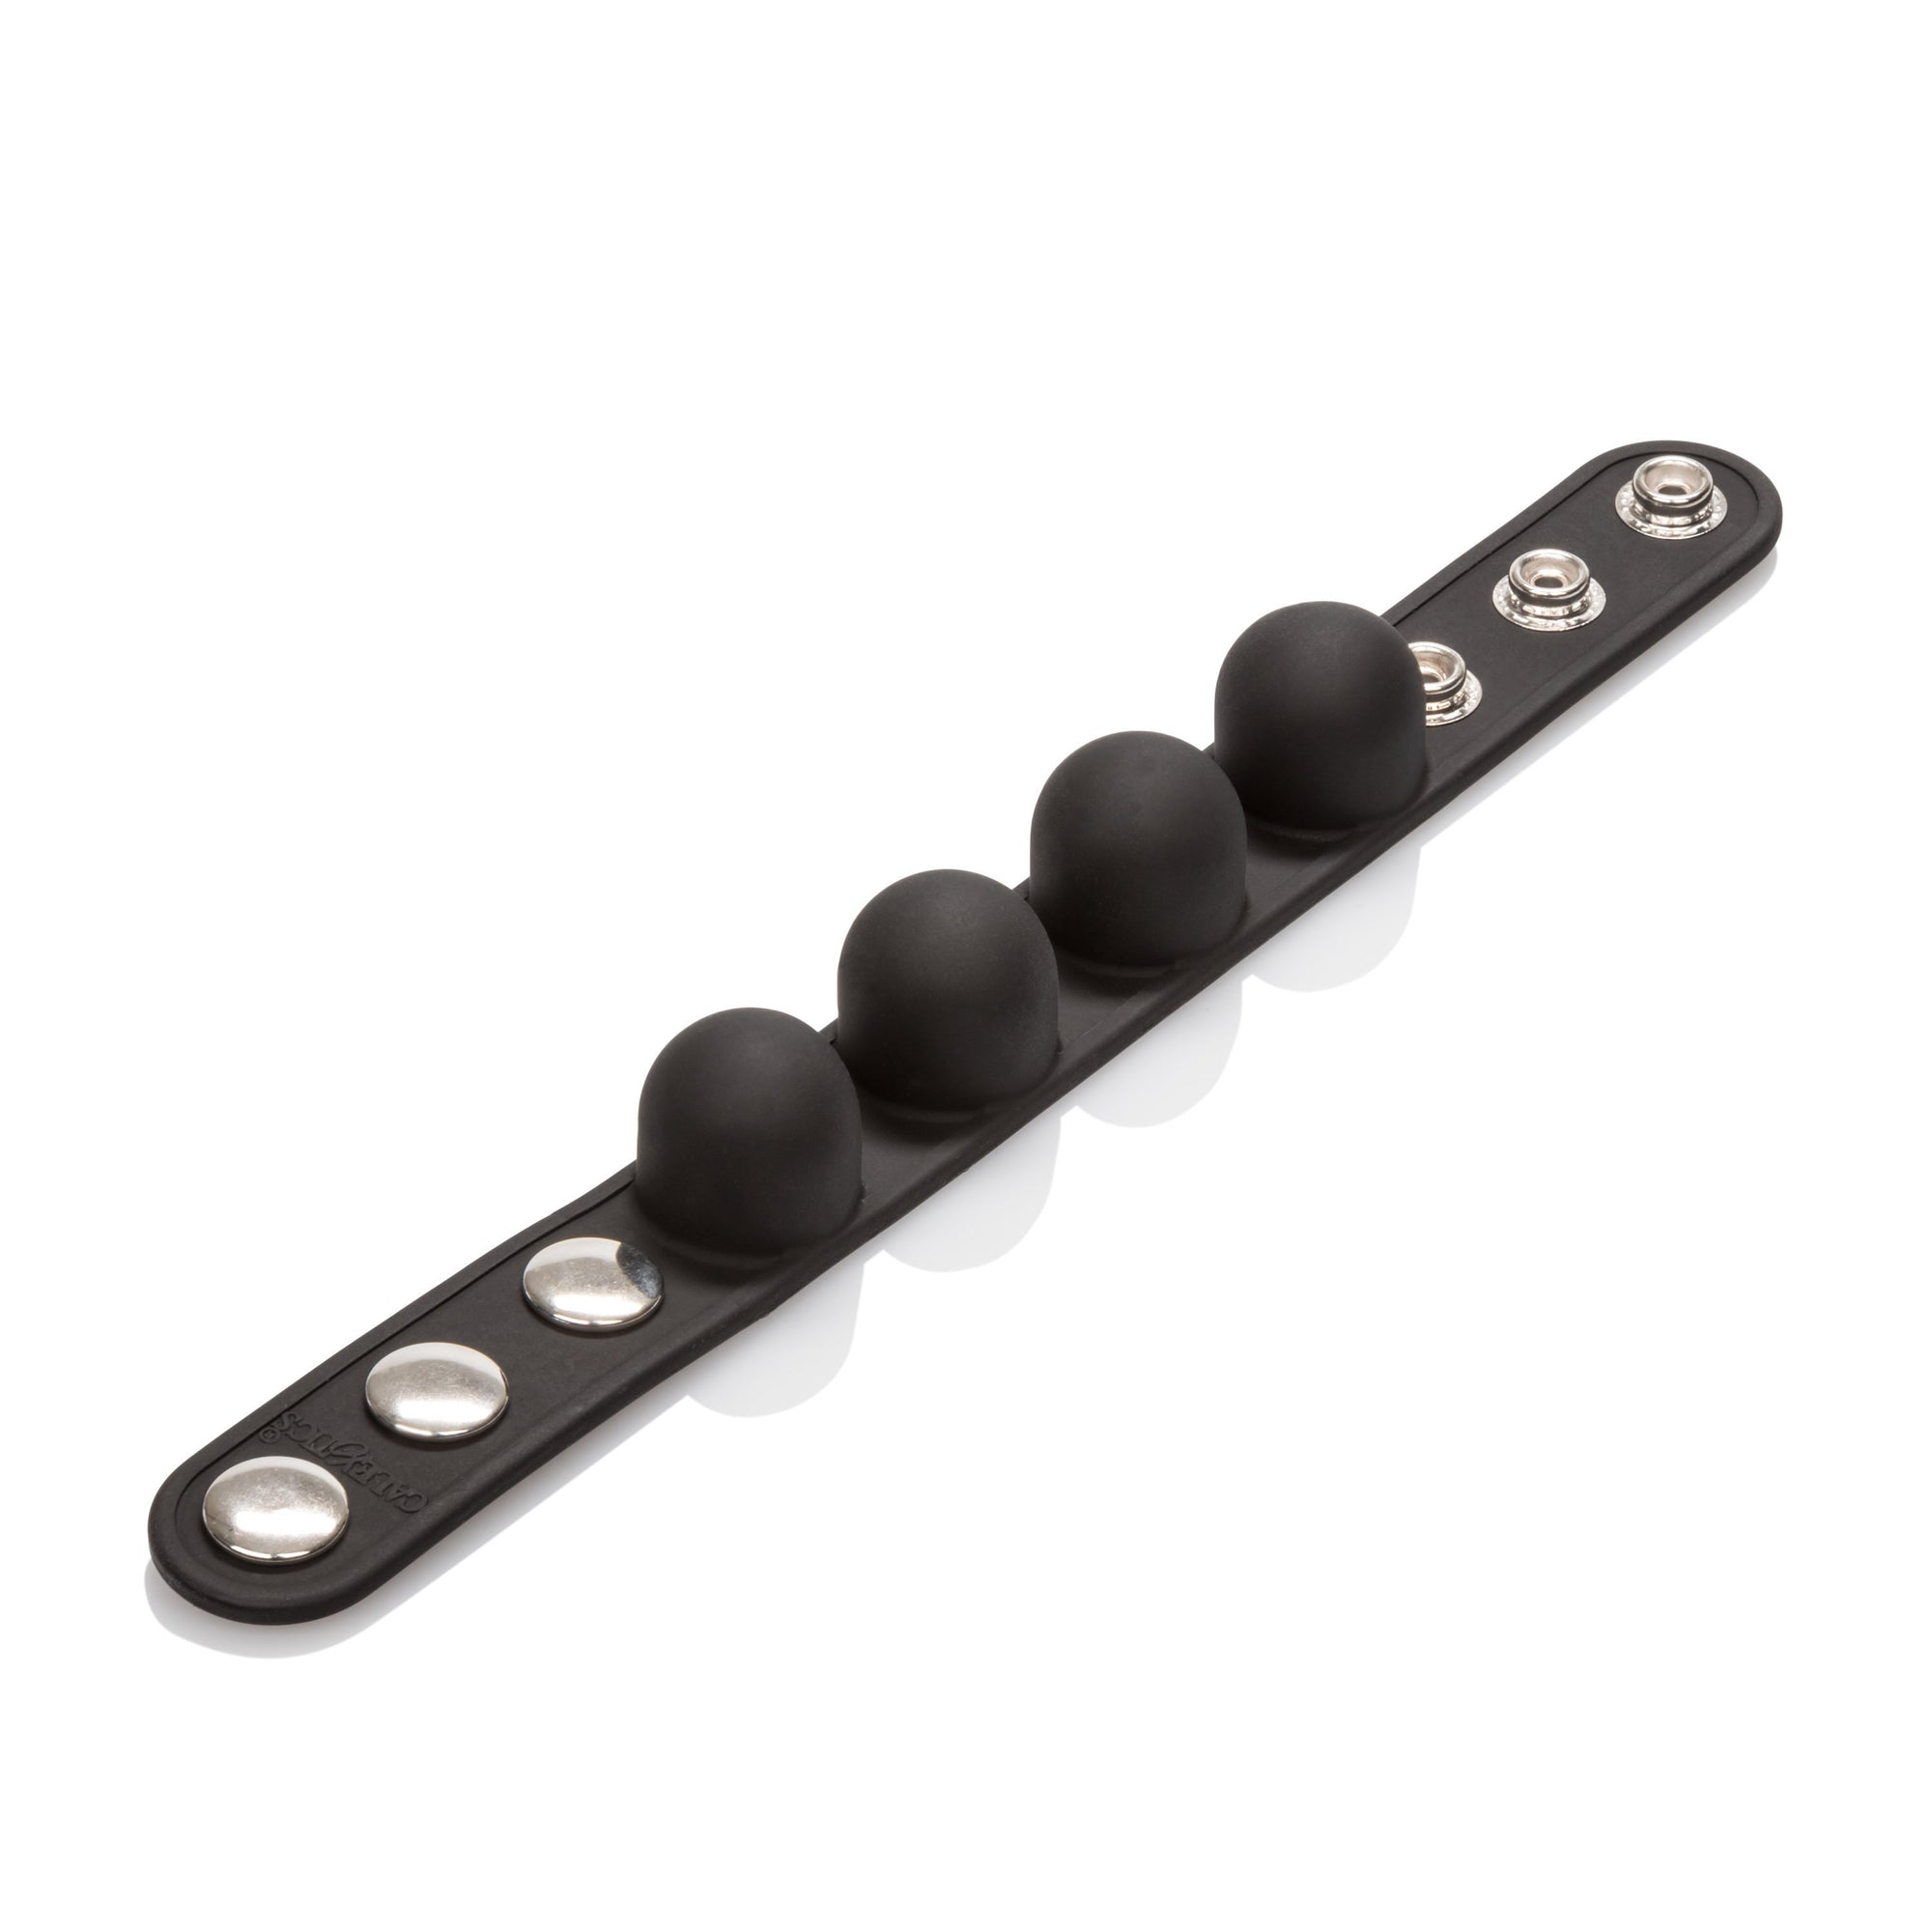 California Exotics - Weighted Ball Stretcher Cock Ring (Black) Silicone Cock Ring (Non Vibration) Singapore